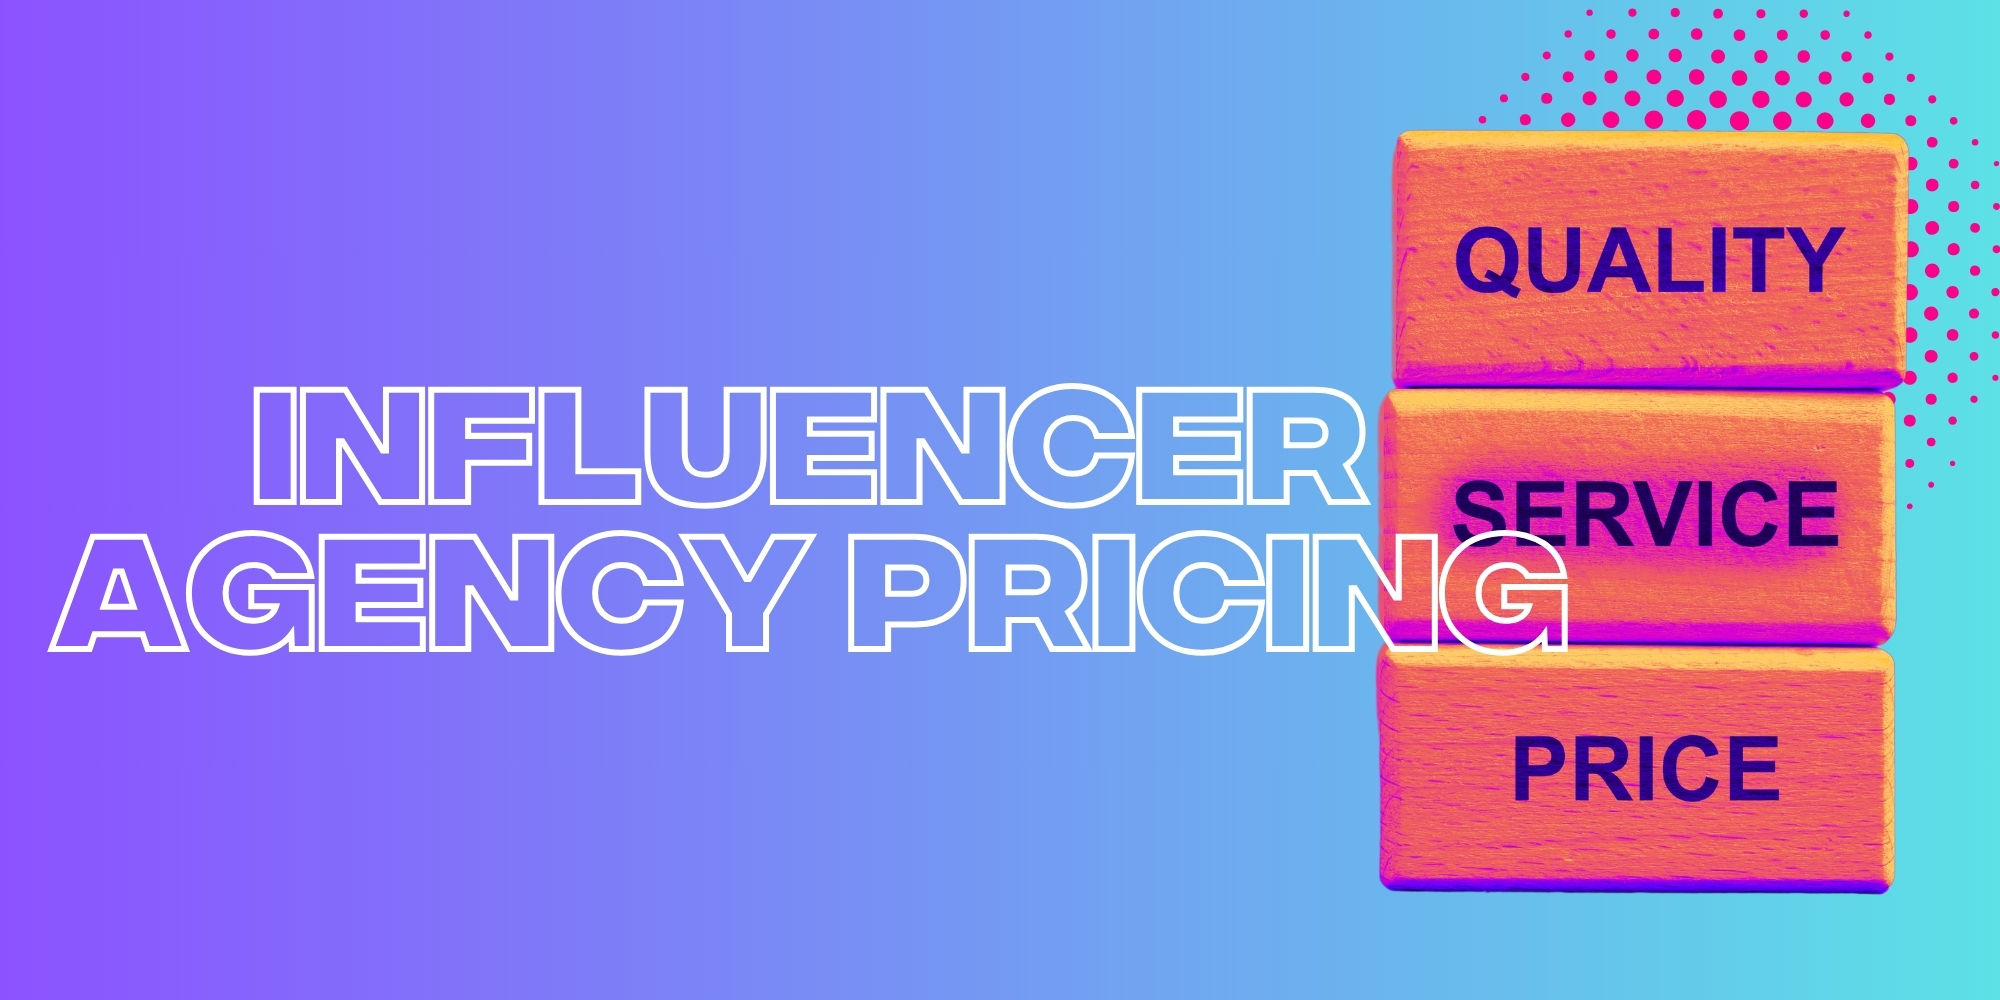 Influencer Marketing Agency Pricing